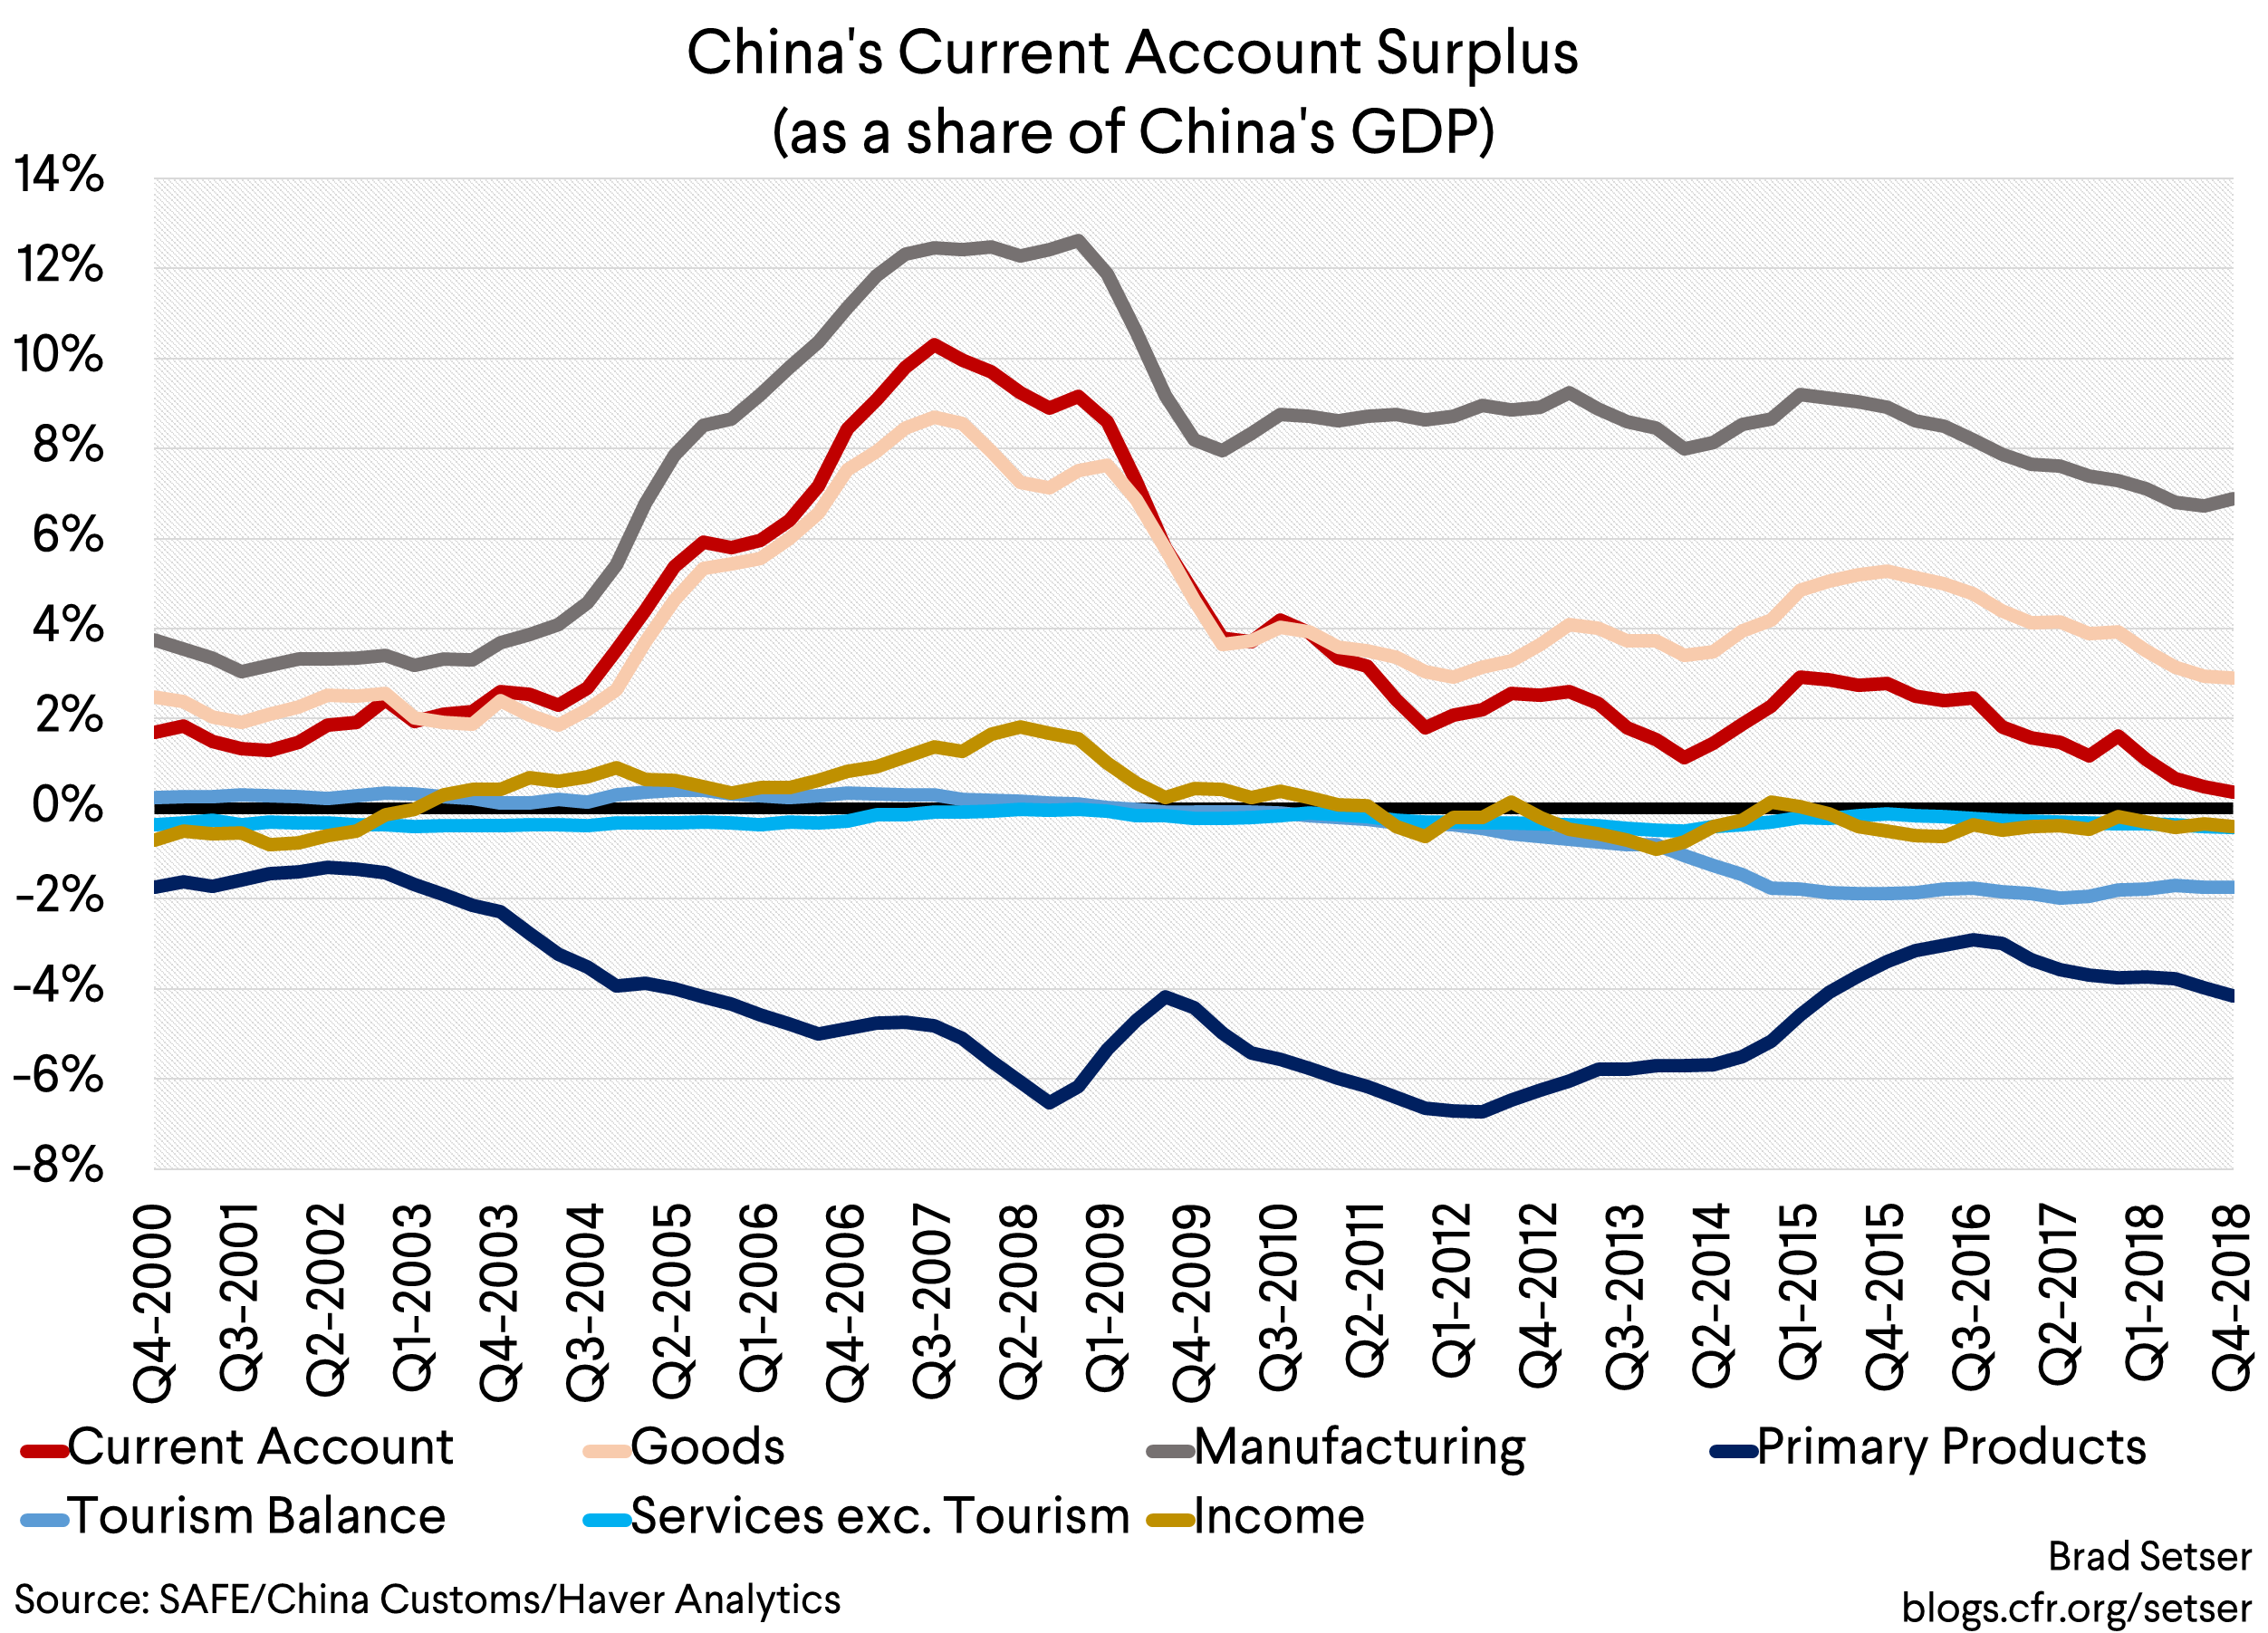 China's Coming Current Account Deficit?